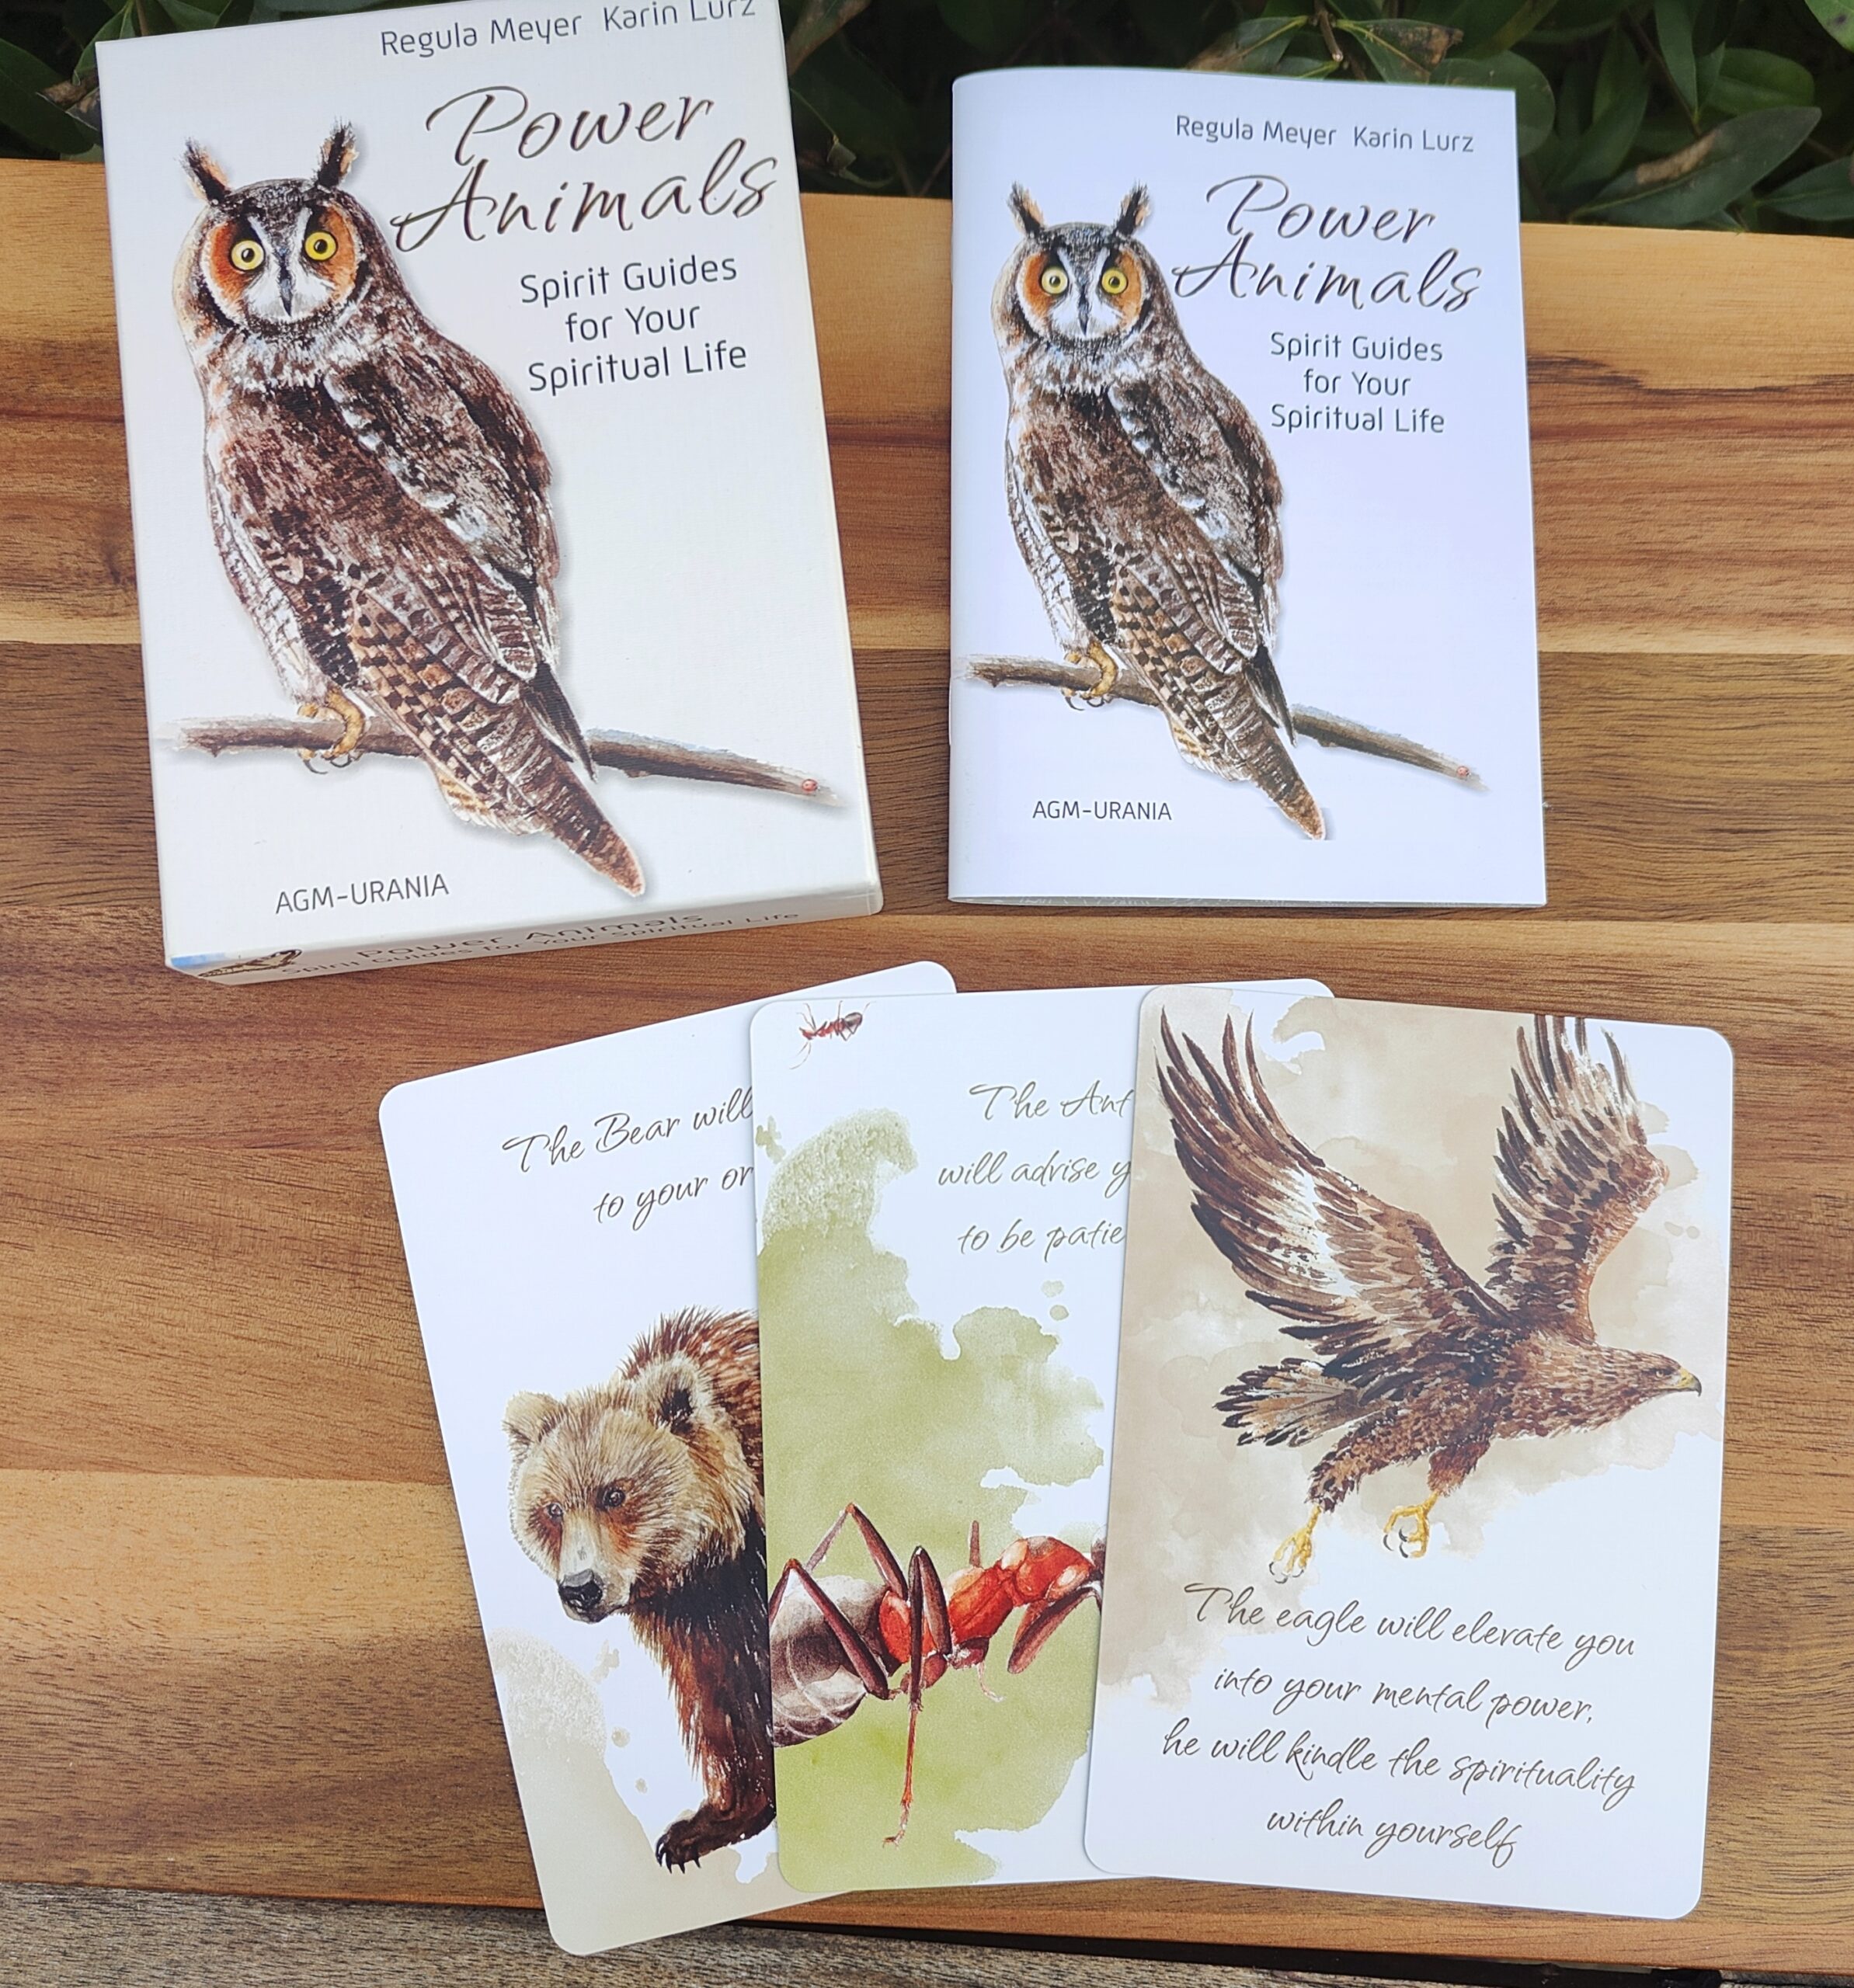 Power Animals - Spirit Guides for Your Spiritual Life